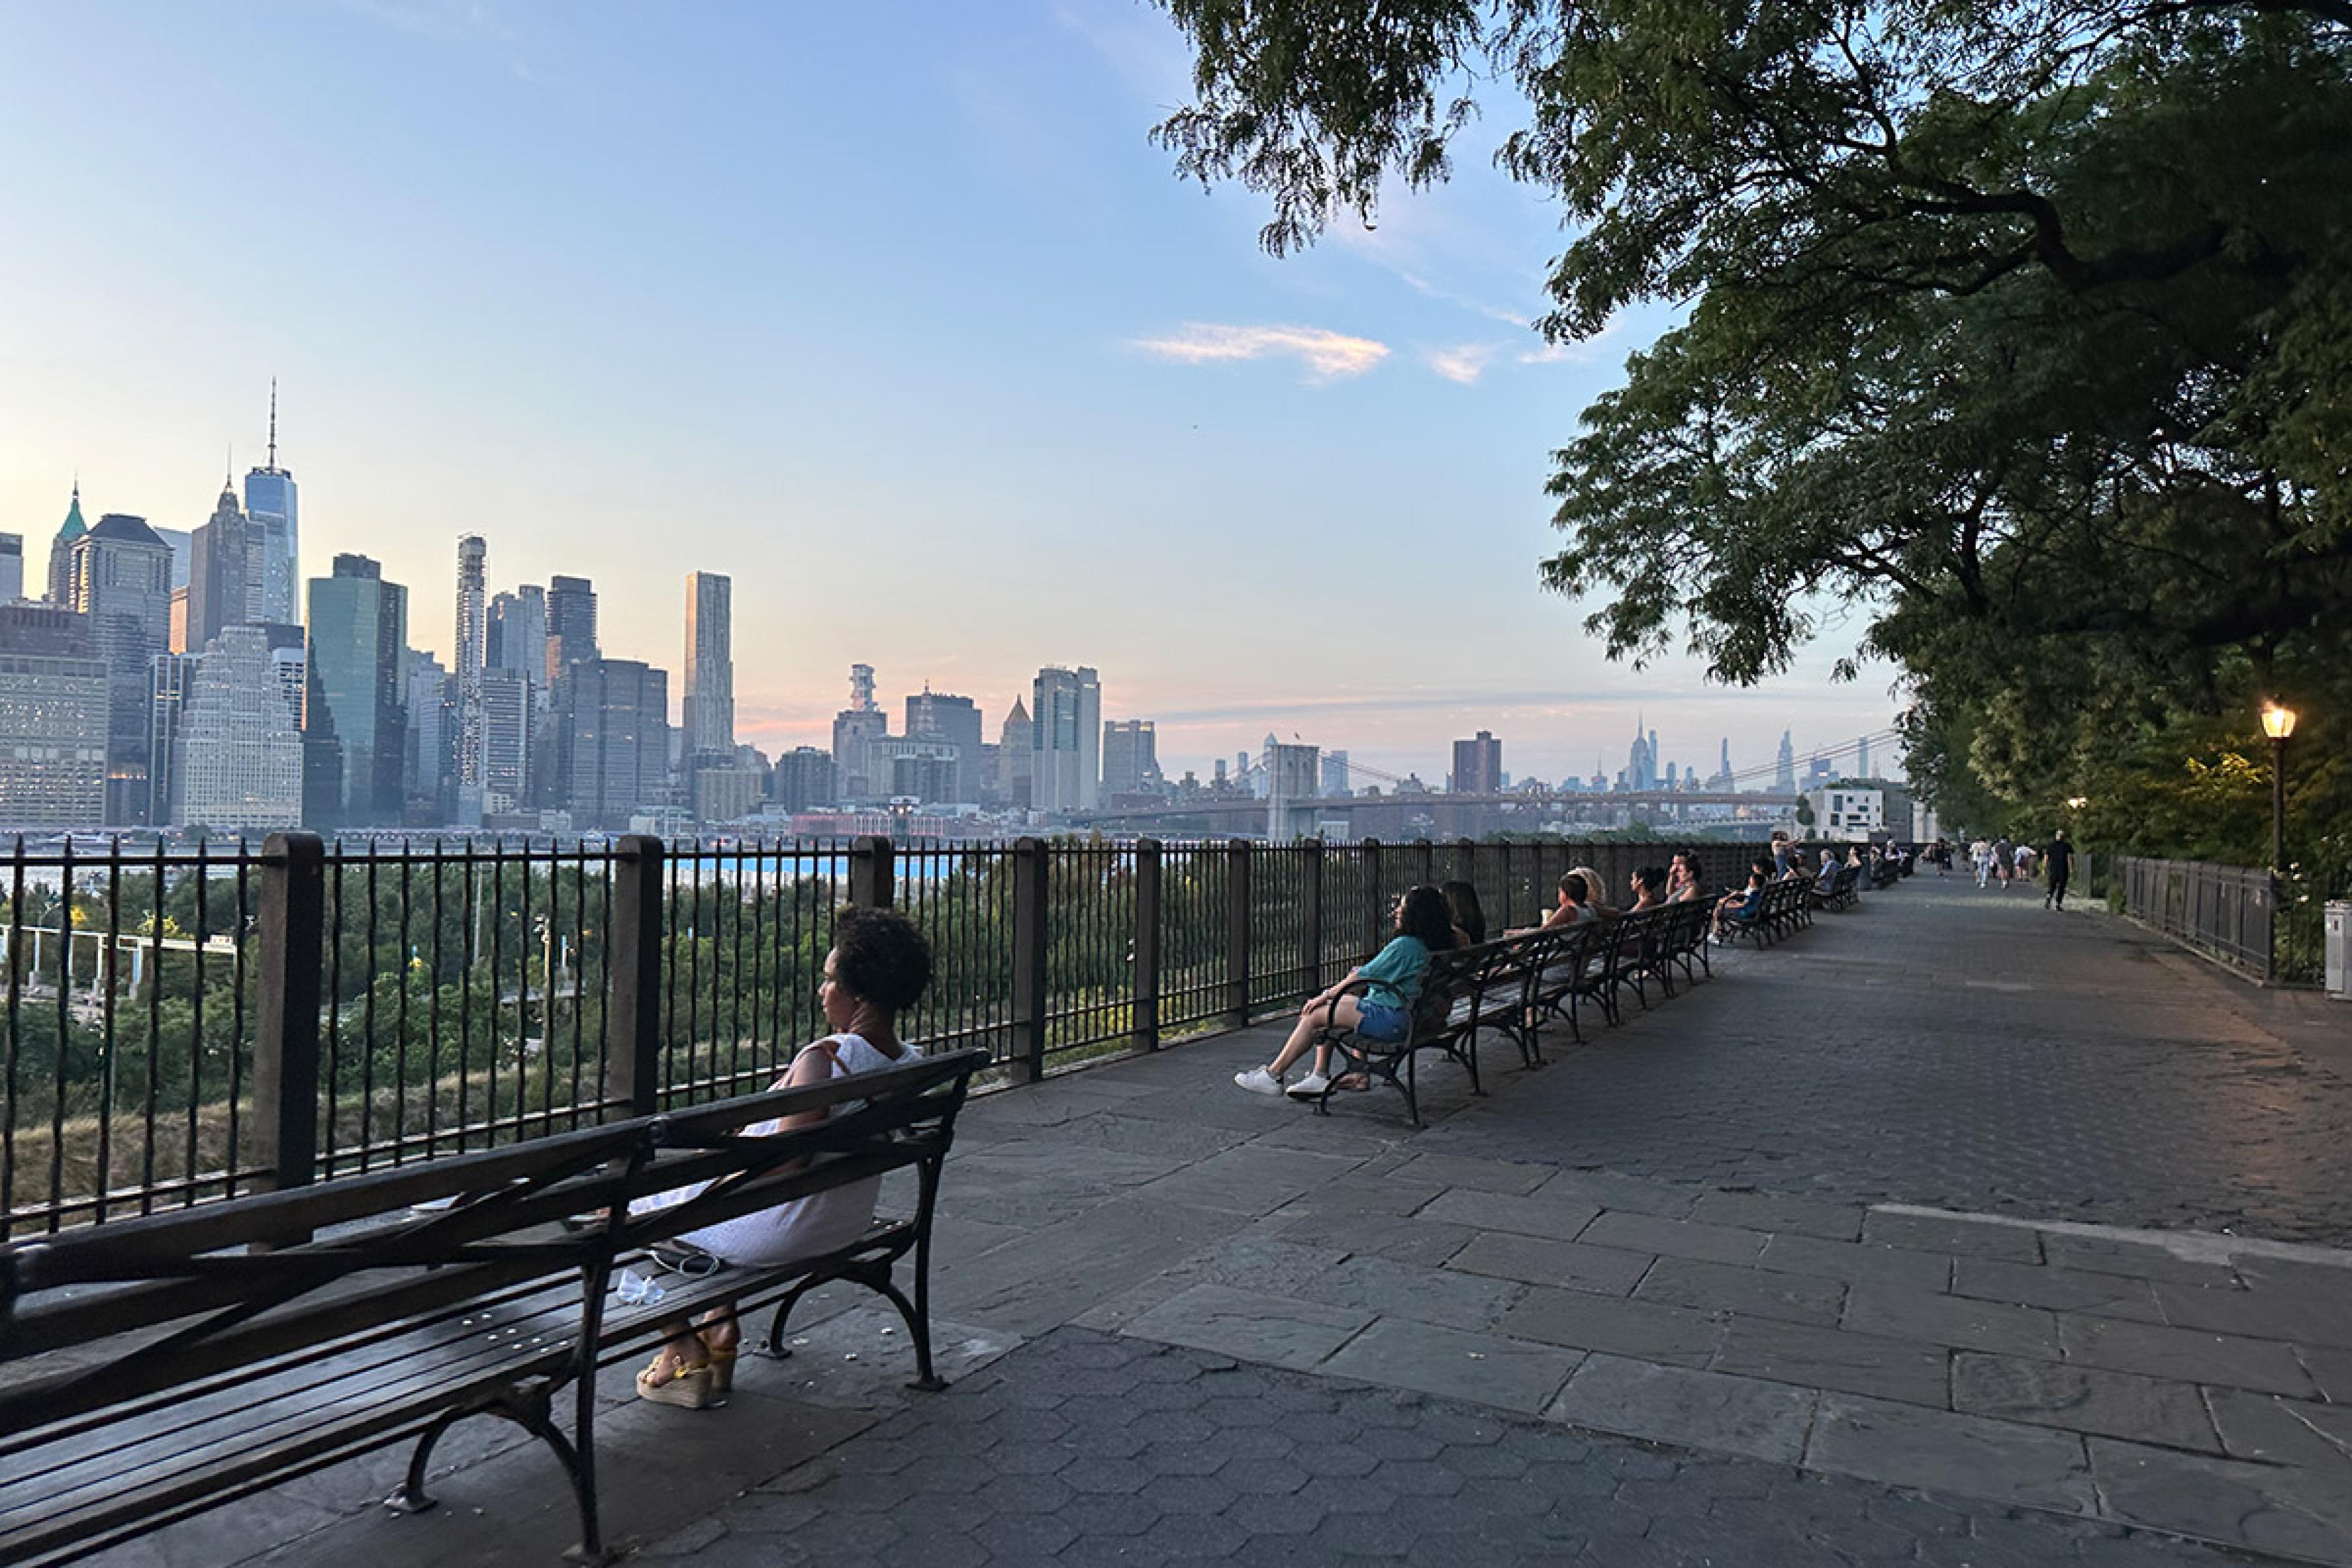 long paved promenade with view of nyc skyline across water